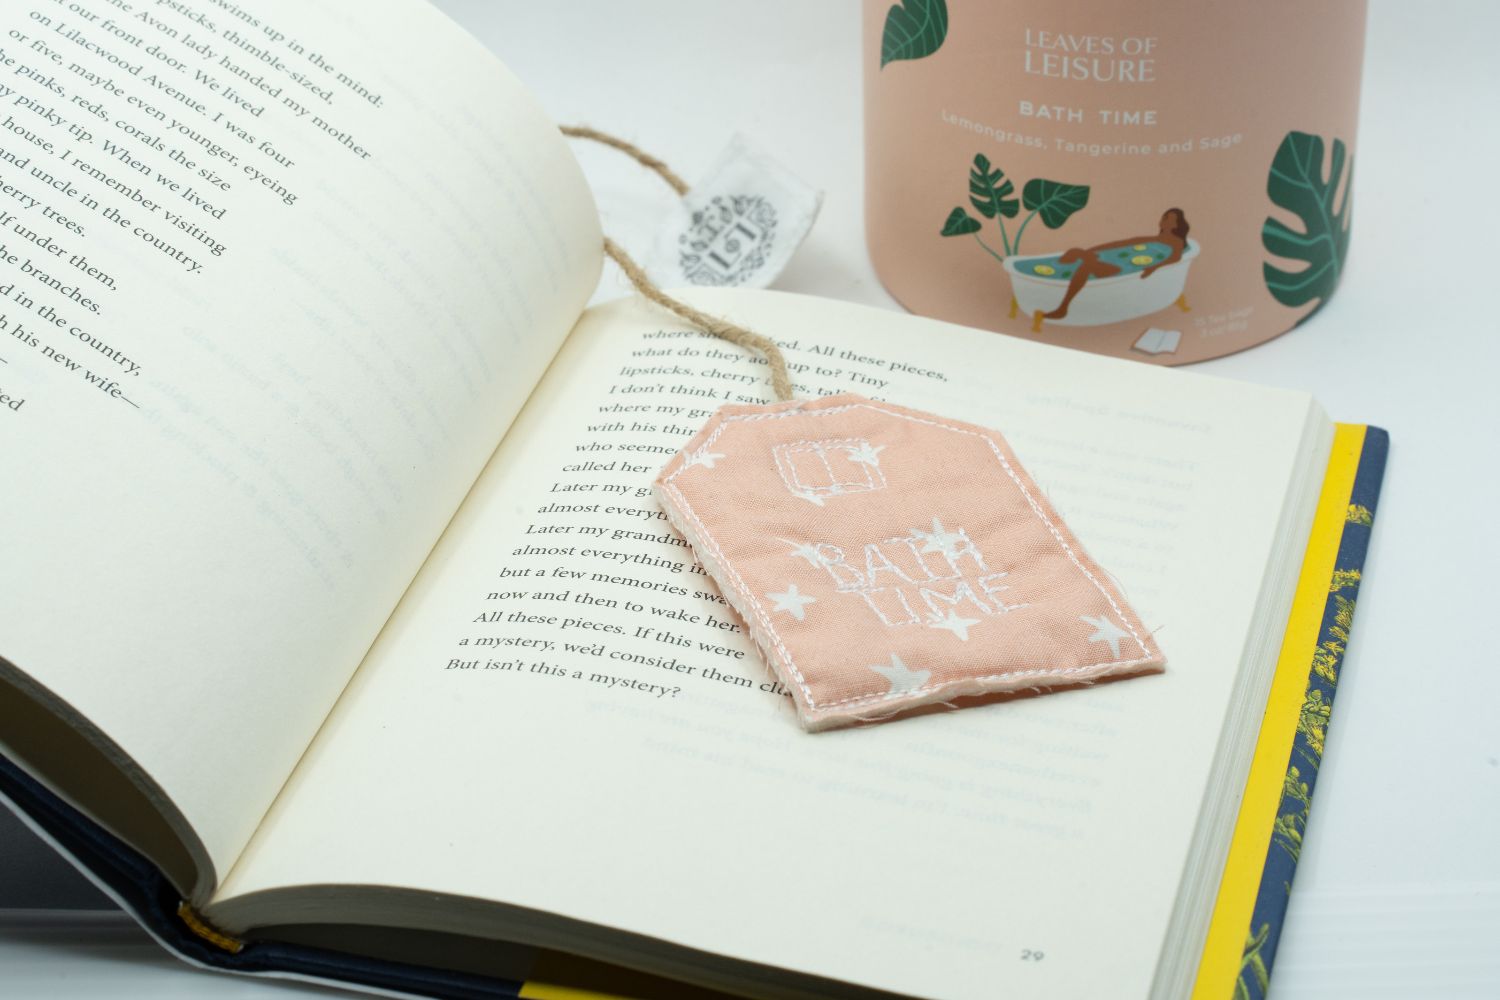 Bath Time Tea & Matching Upcycled Bookmark Leaves of Leisure